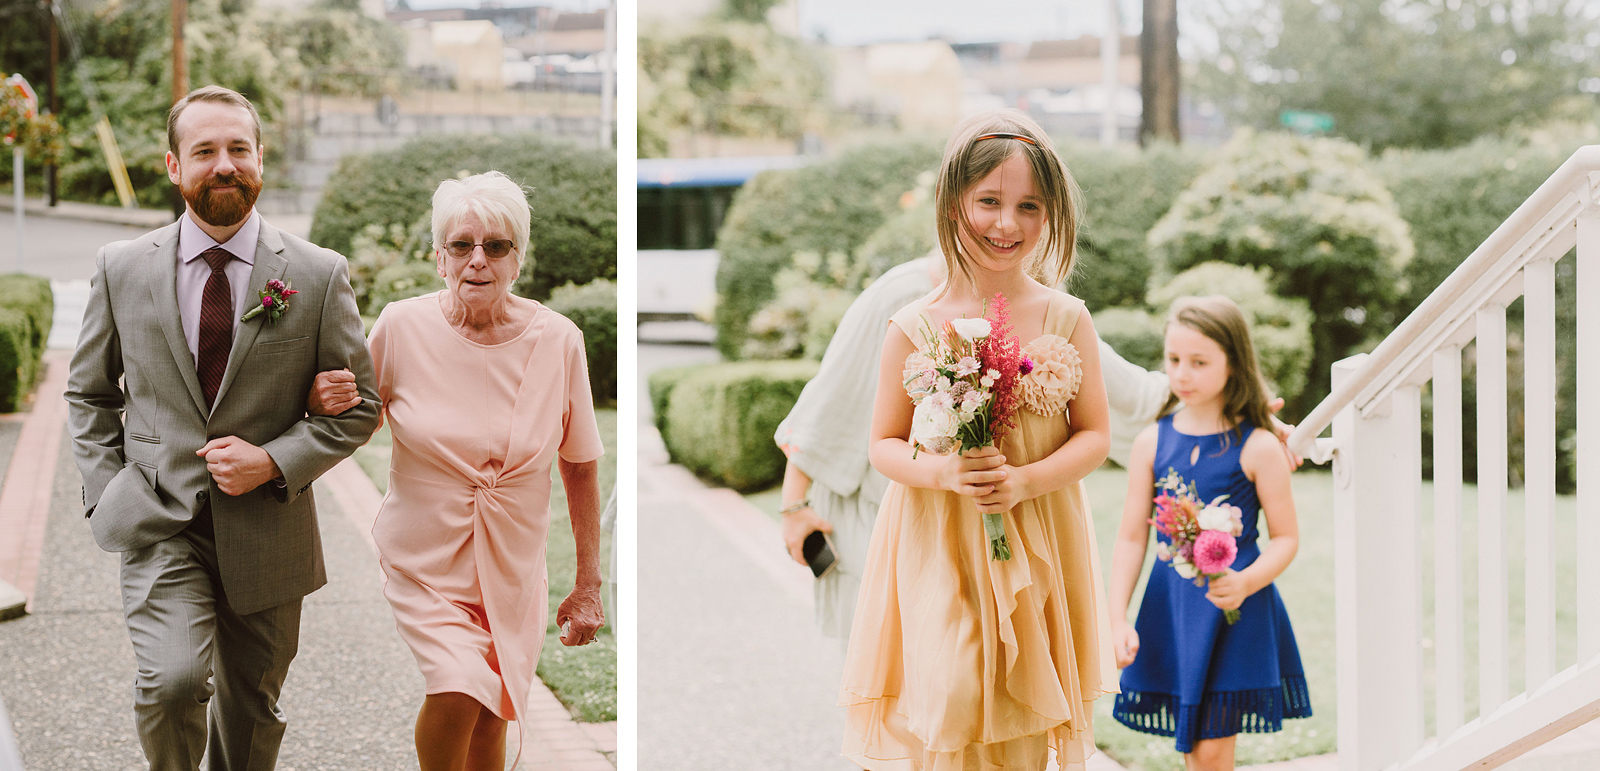 Portraits of the flower girls and groom walking his mom down the aisle - Oaks Pioneer Church Wedding